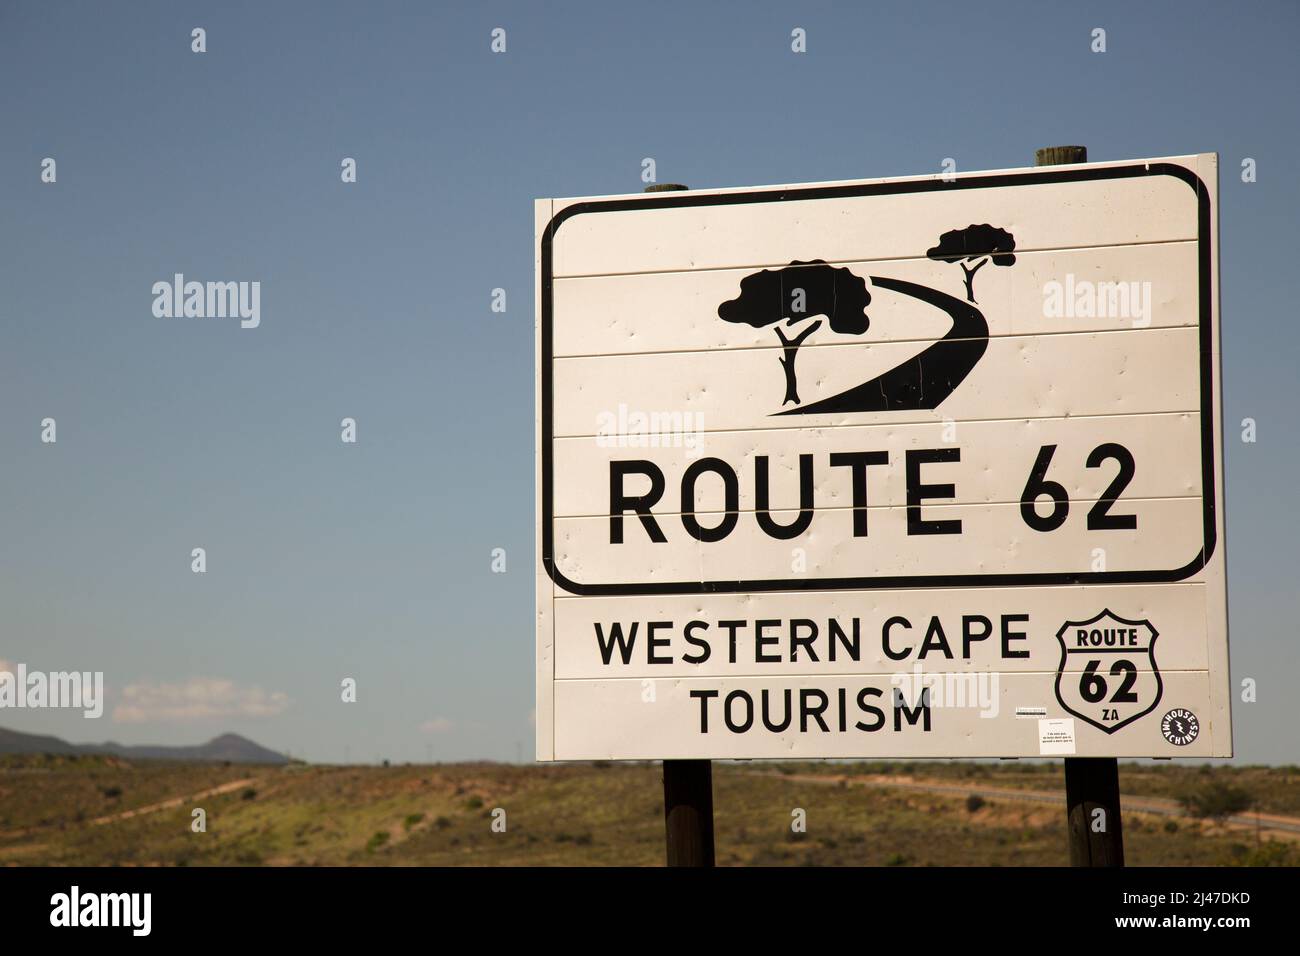 A road sign on Route 62 in the Western Cape of South Africa, Stock Photo